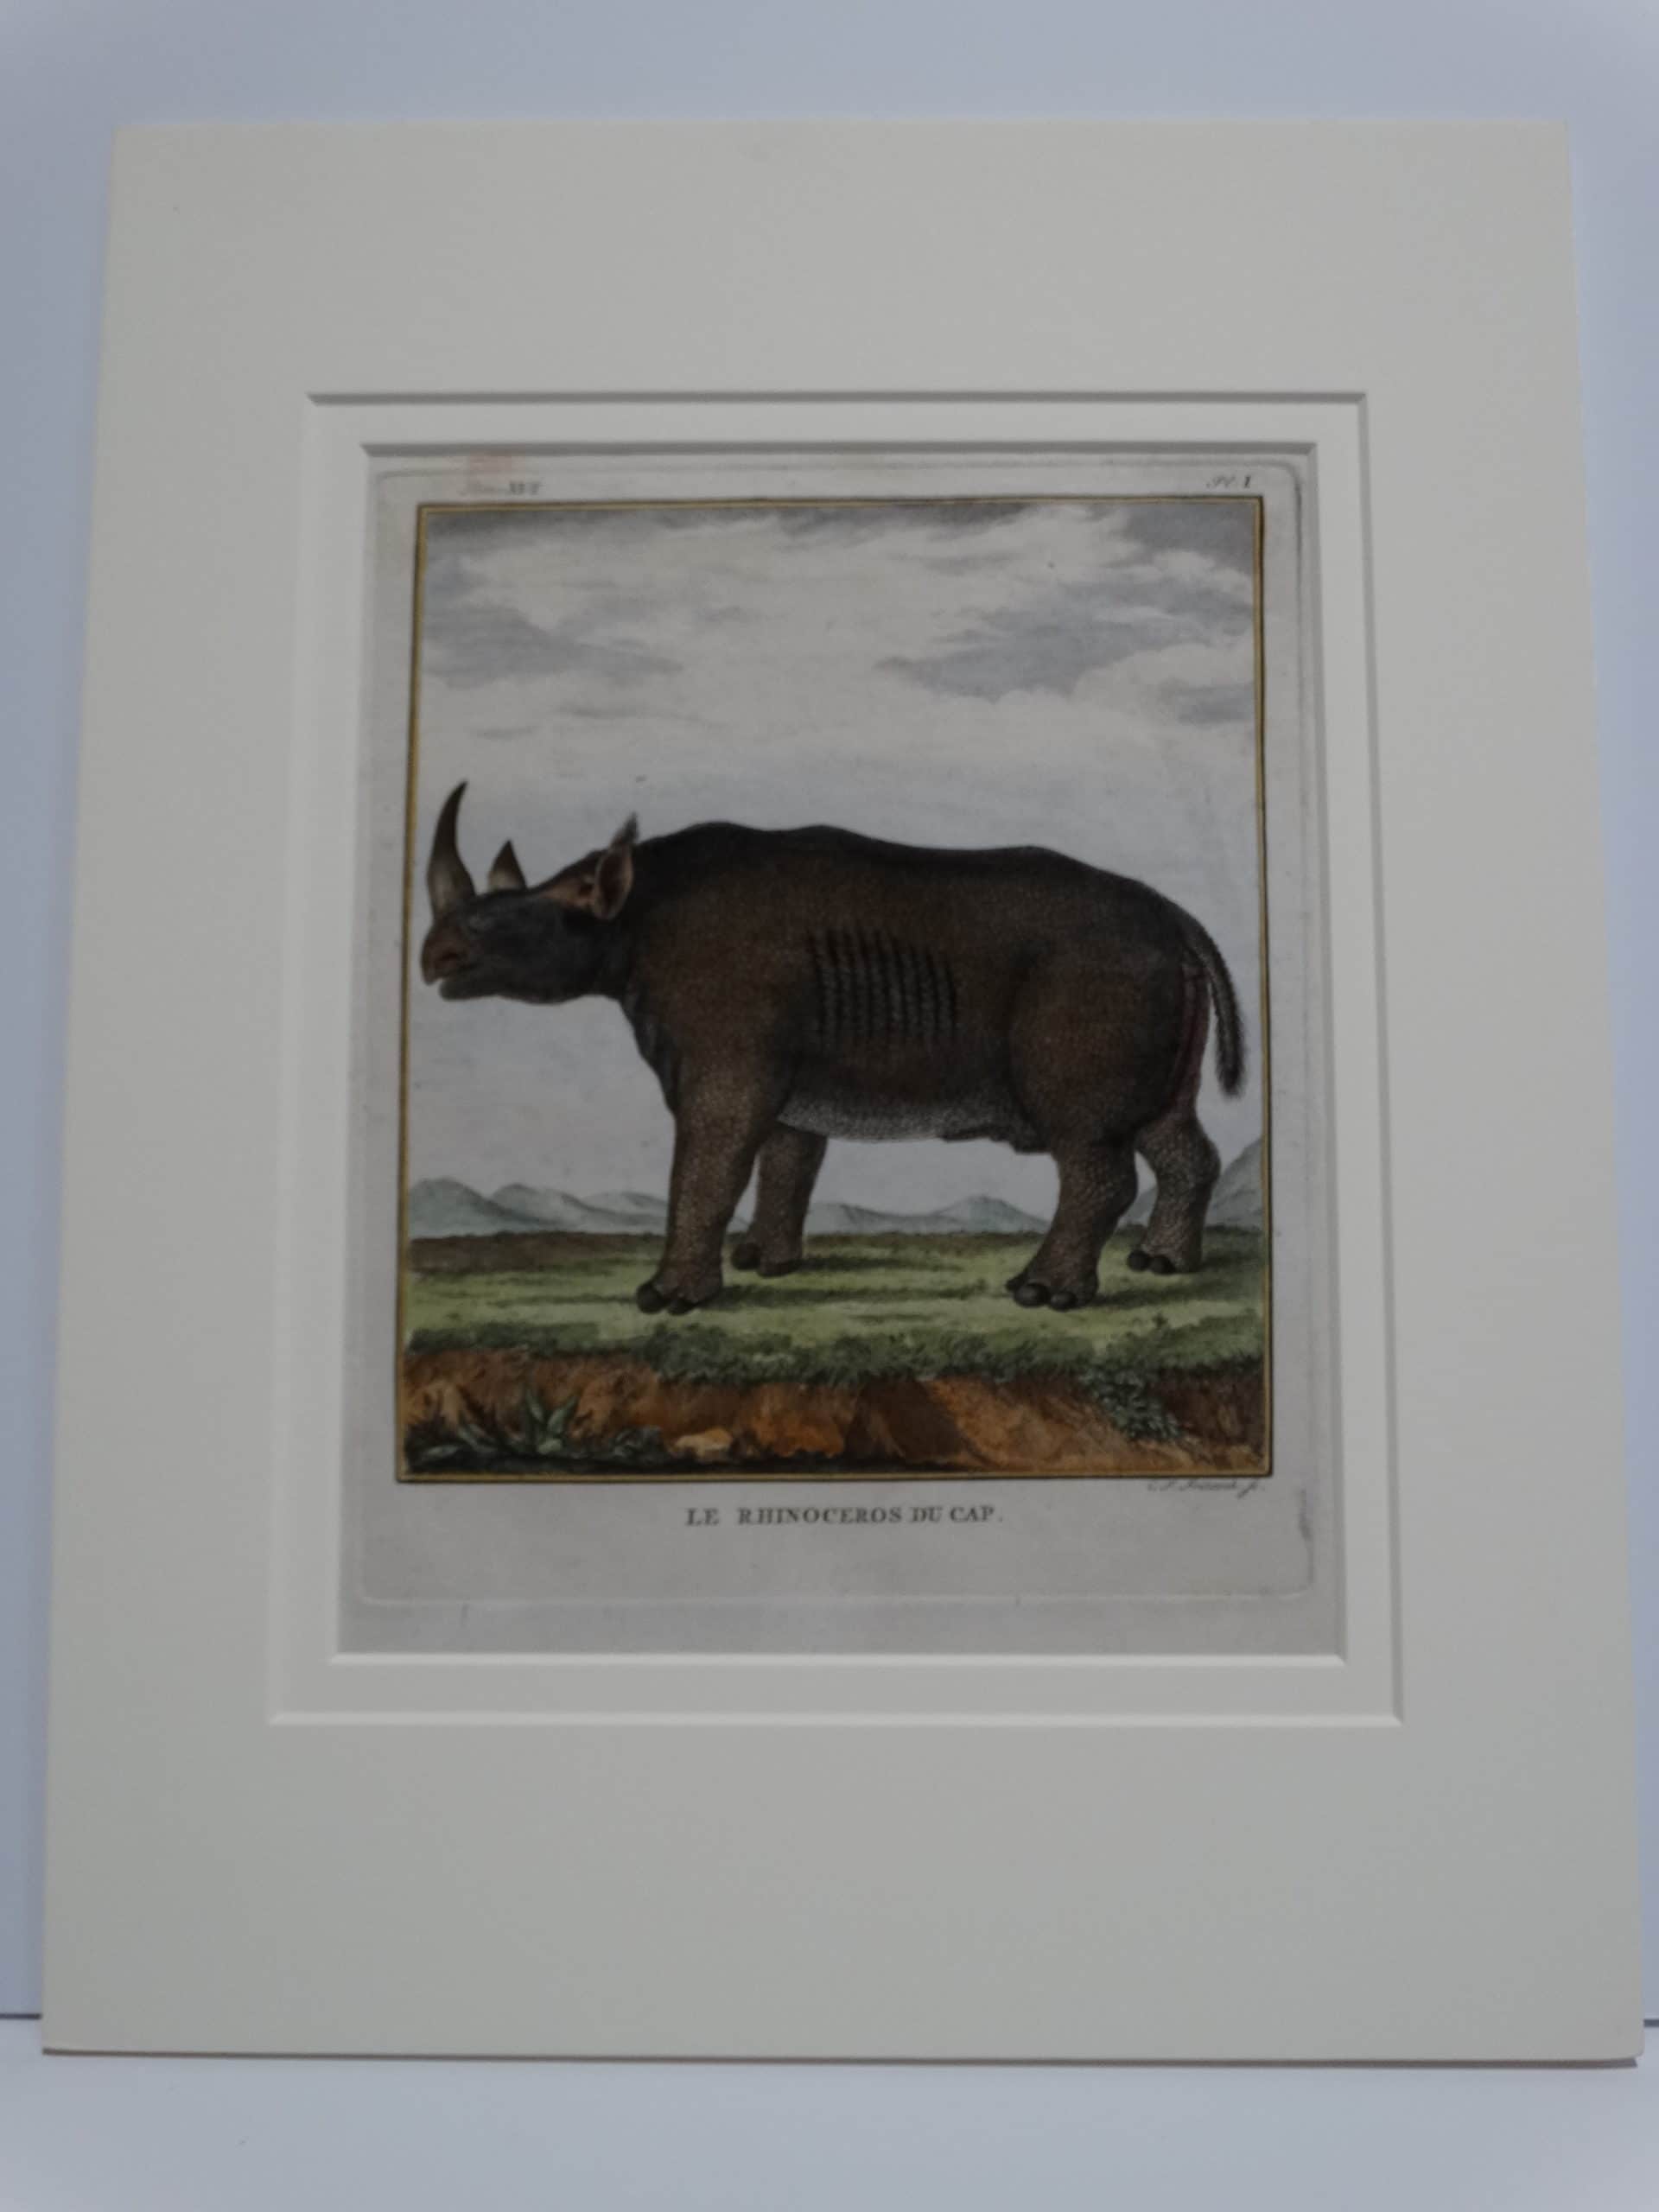 Rare engraving of a Rhinocerous, nearly 170 years old, matted up for picture framing.